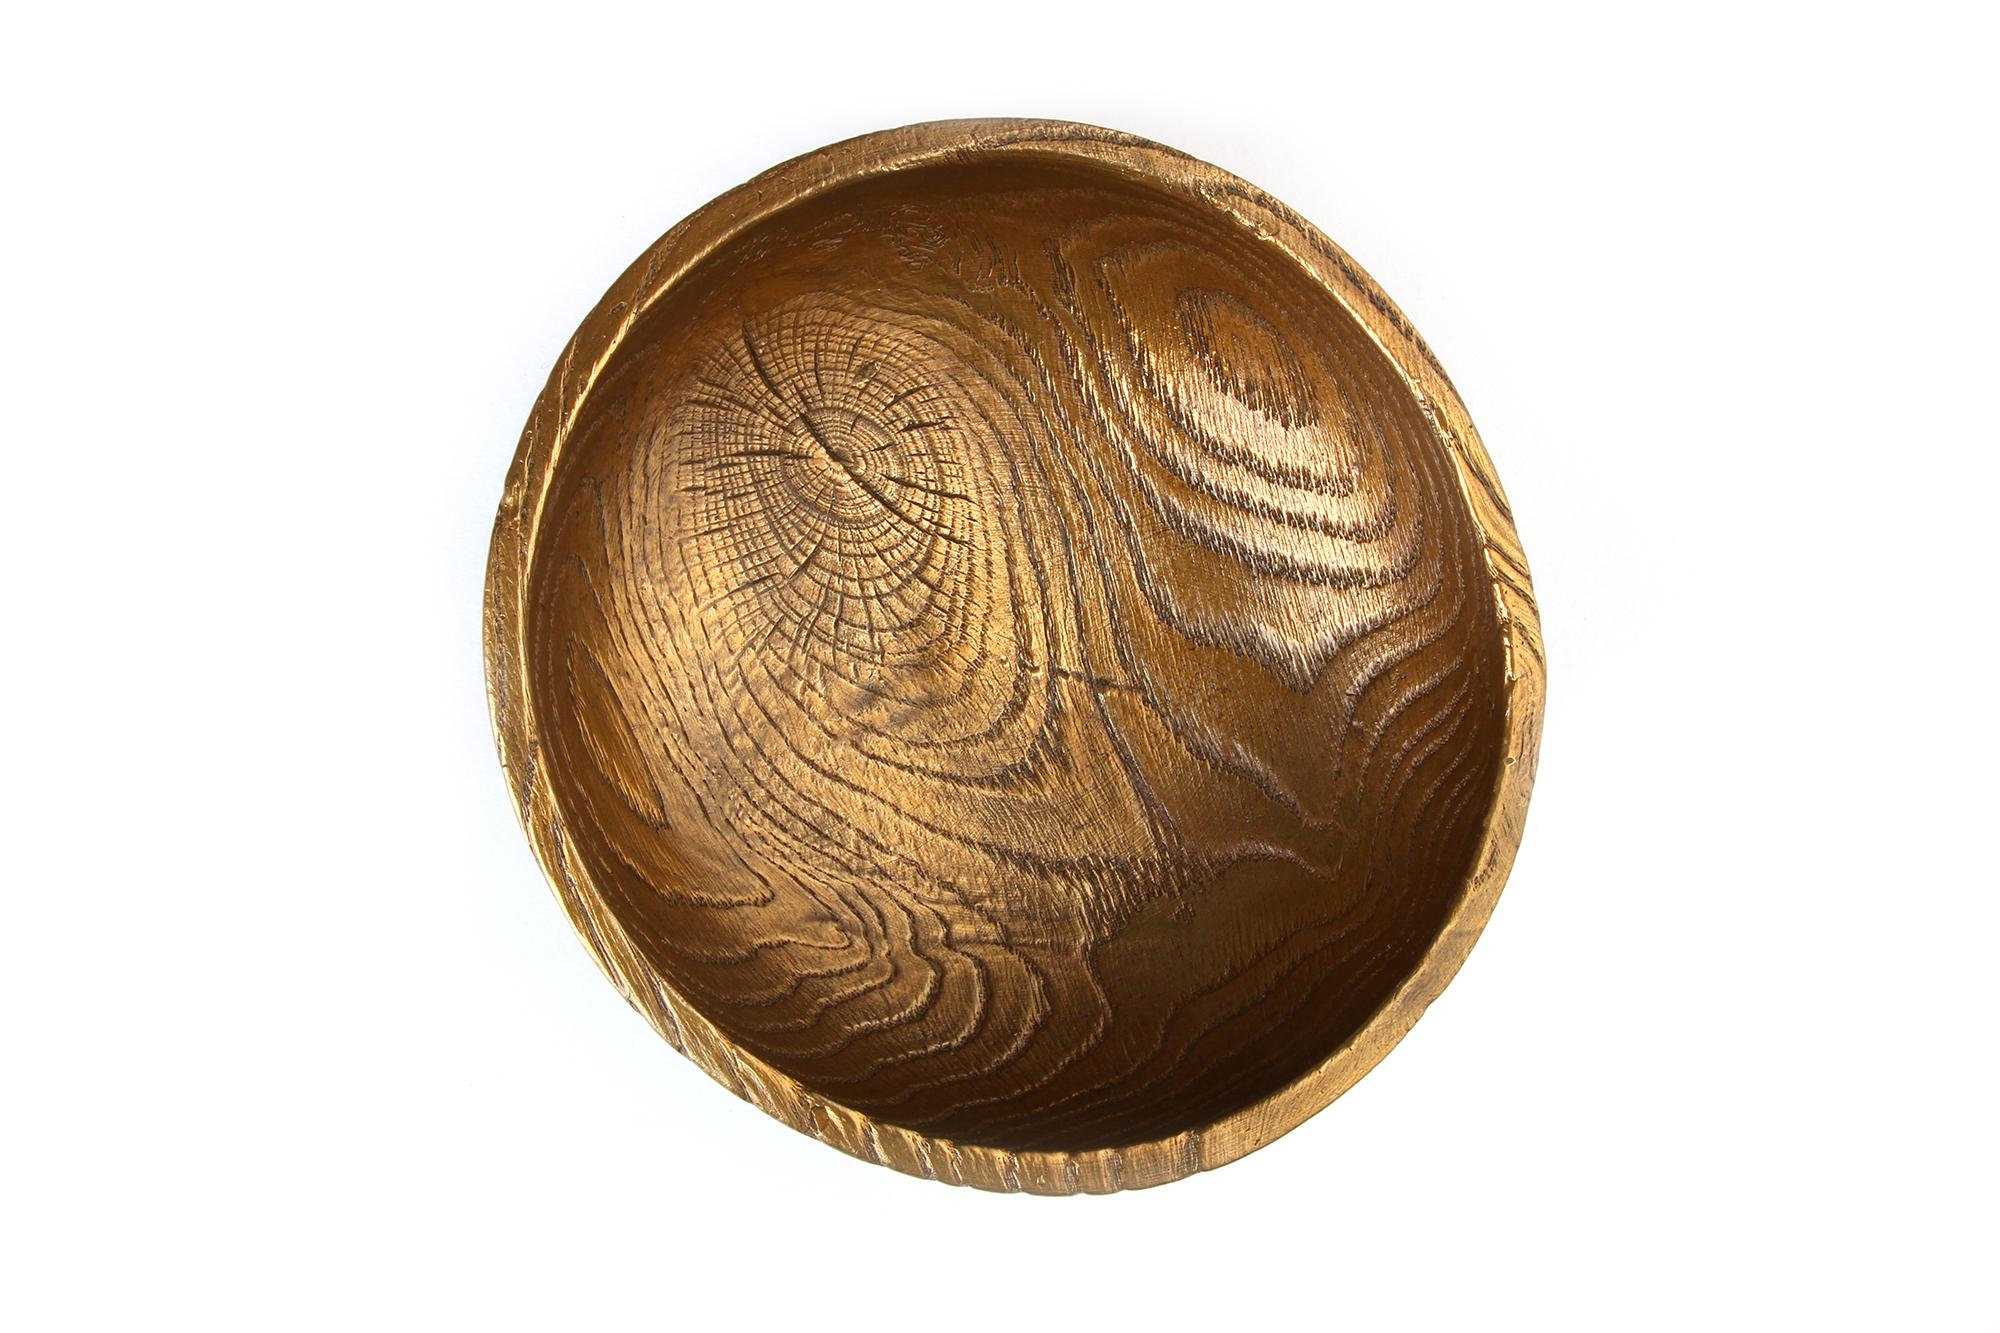 Solid Bronze Set ‘Everest’, ‘Alpine’ and ‘Flora’ Bowls with Wood Grain Texture For Sale 8